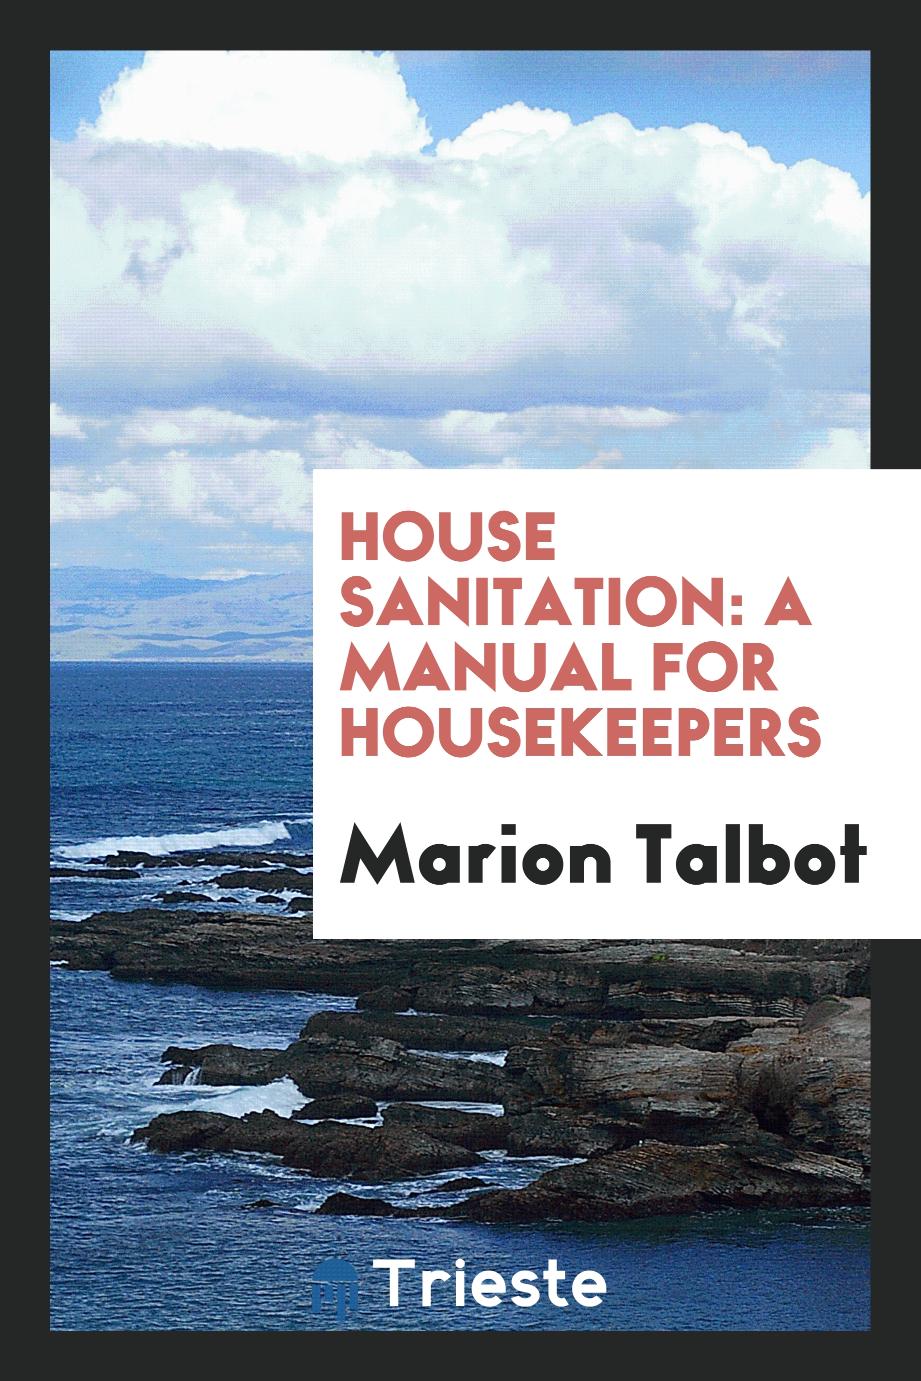 House Sanitation: A Manual for Housekeepers